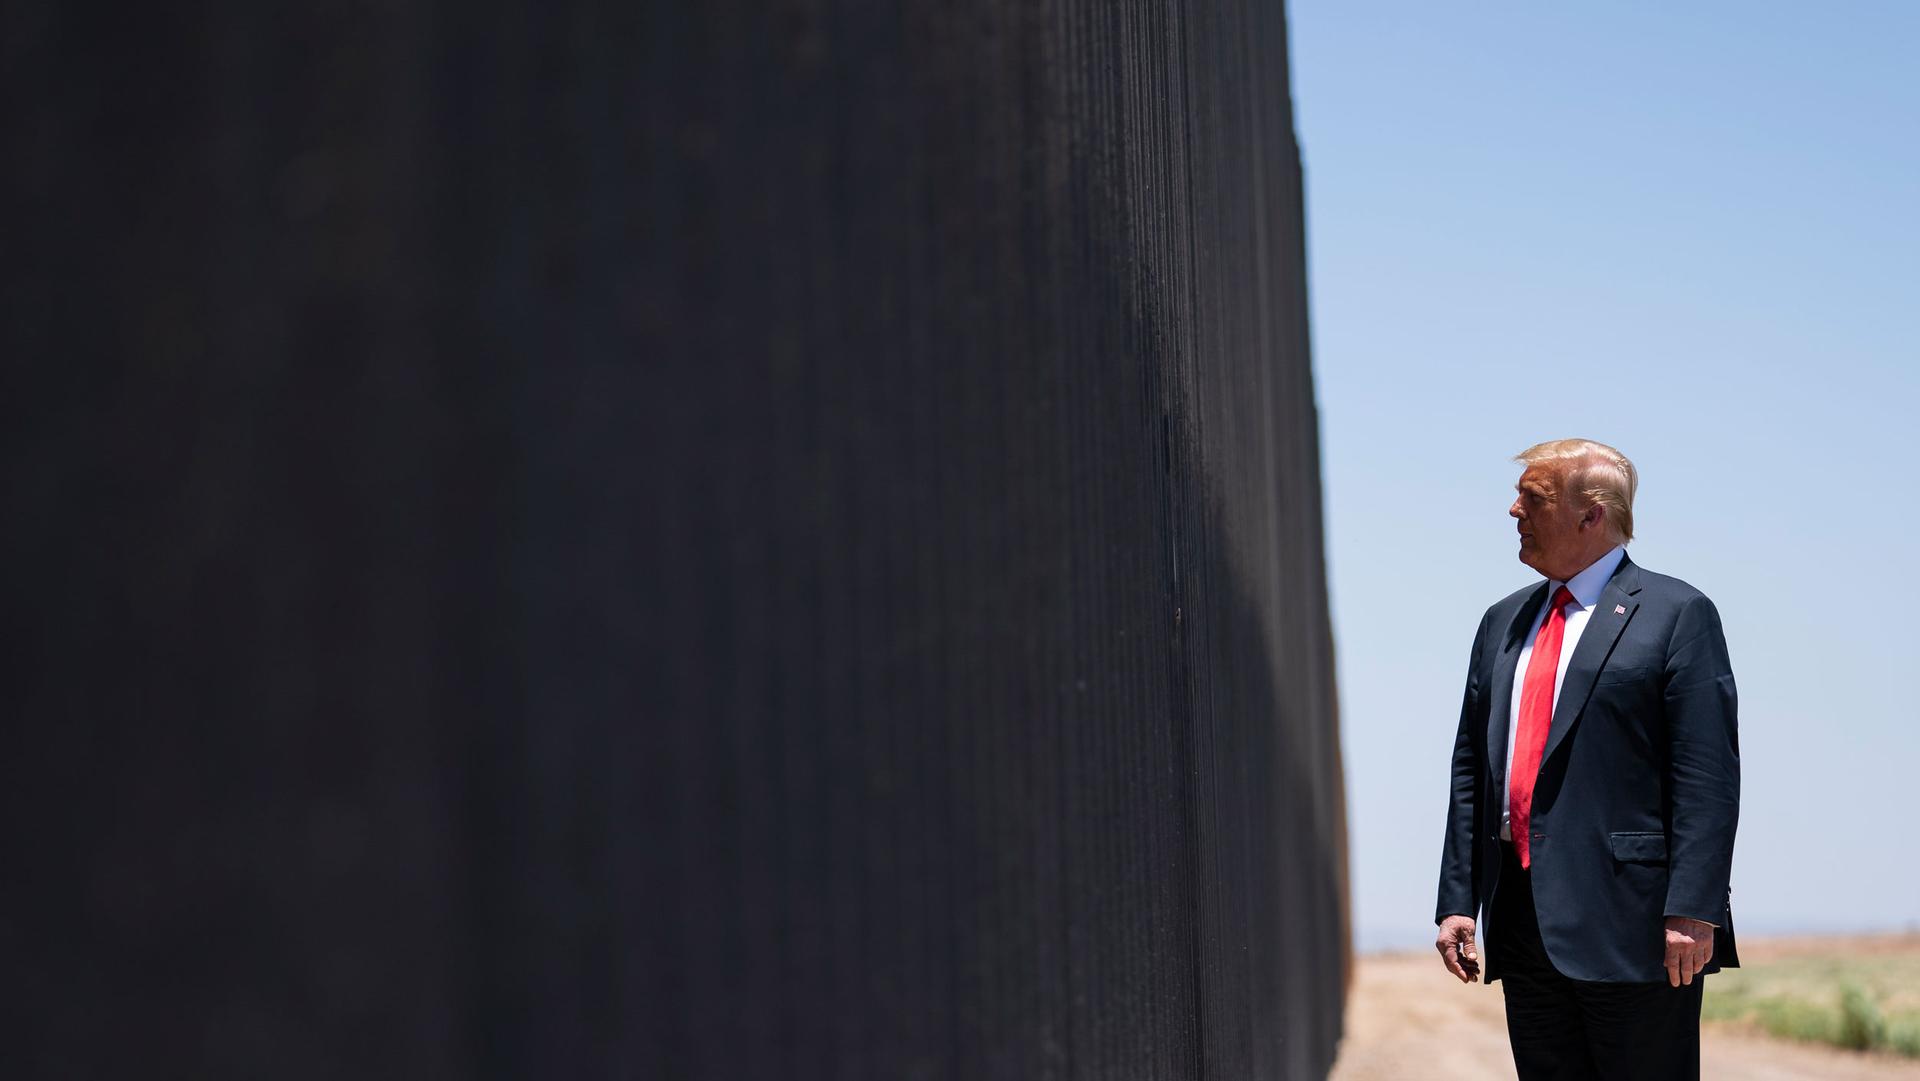 President Donald Trump is shown wearing a blue suit and red tie while looking at the dark facade of the US-Mexico border wall.